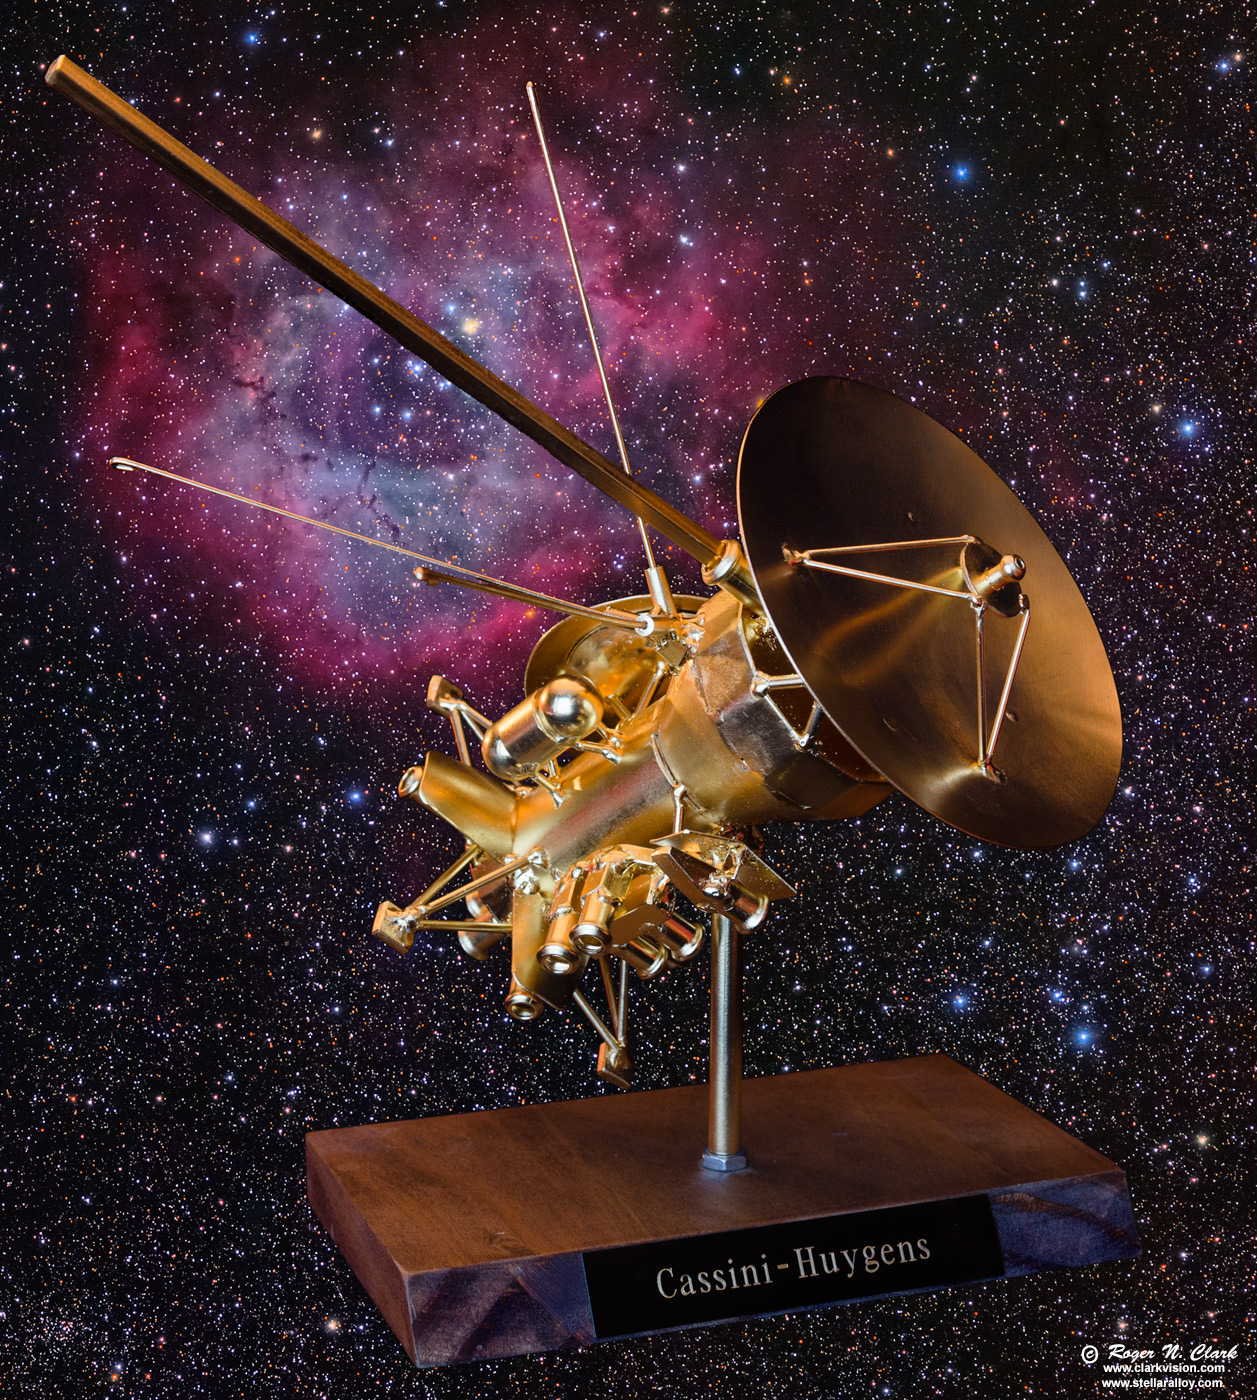 image cassini-spacecraft-model-gold1a+rosette-nebula-1400sw.jpg is Copyrighted by Roger N. Clark, www.clarkvision.com